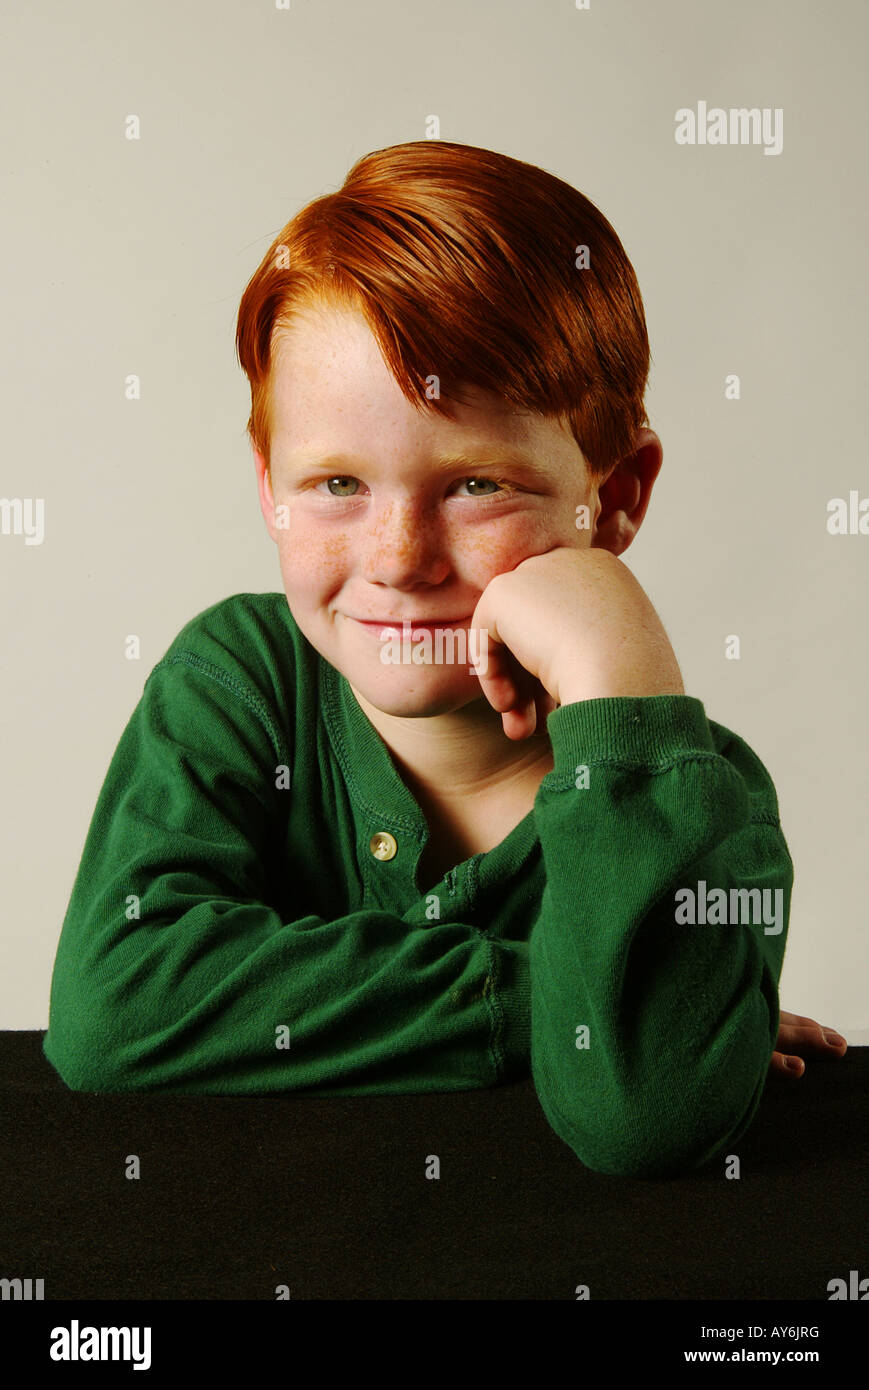 A 5 year old red headed Caucasian boy in a green shirt from Southern  California MODEL RELEASE Stock Photo - Alamy